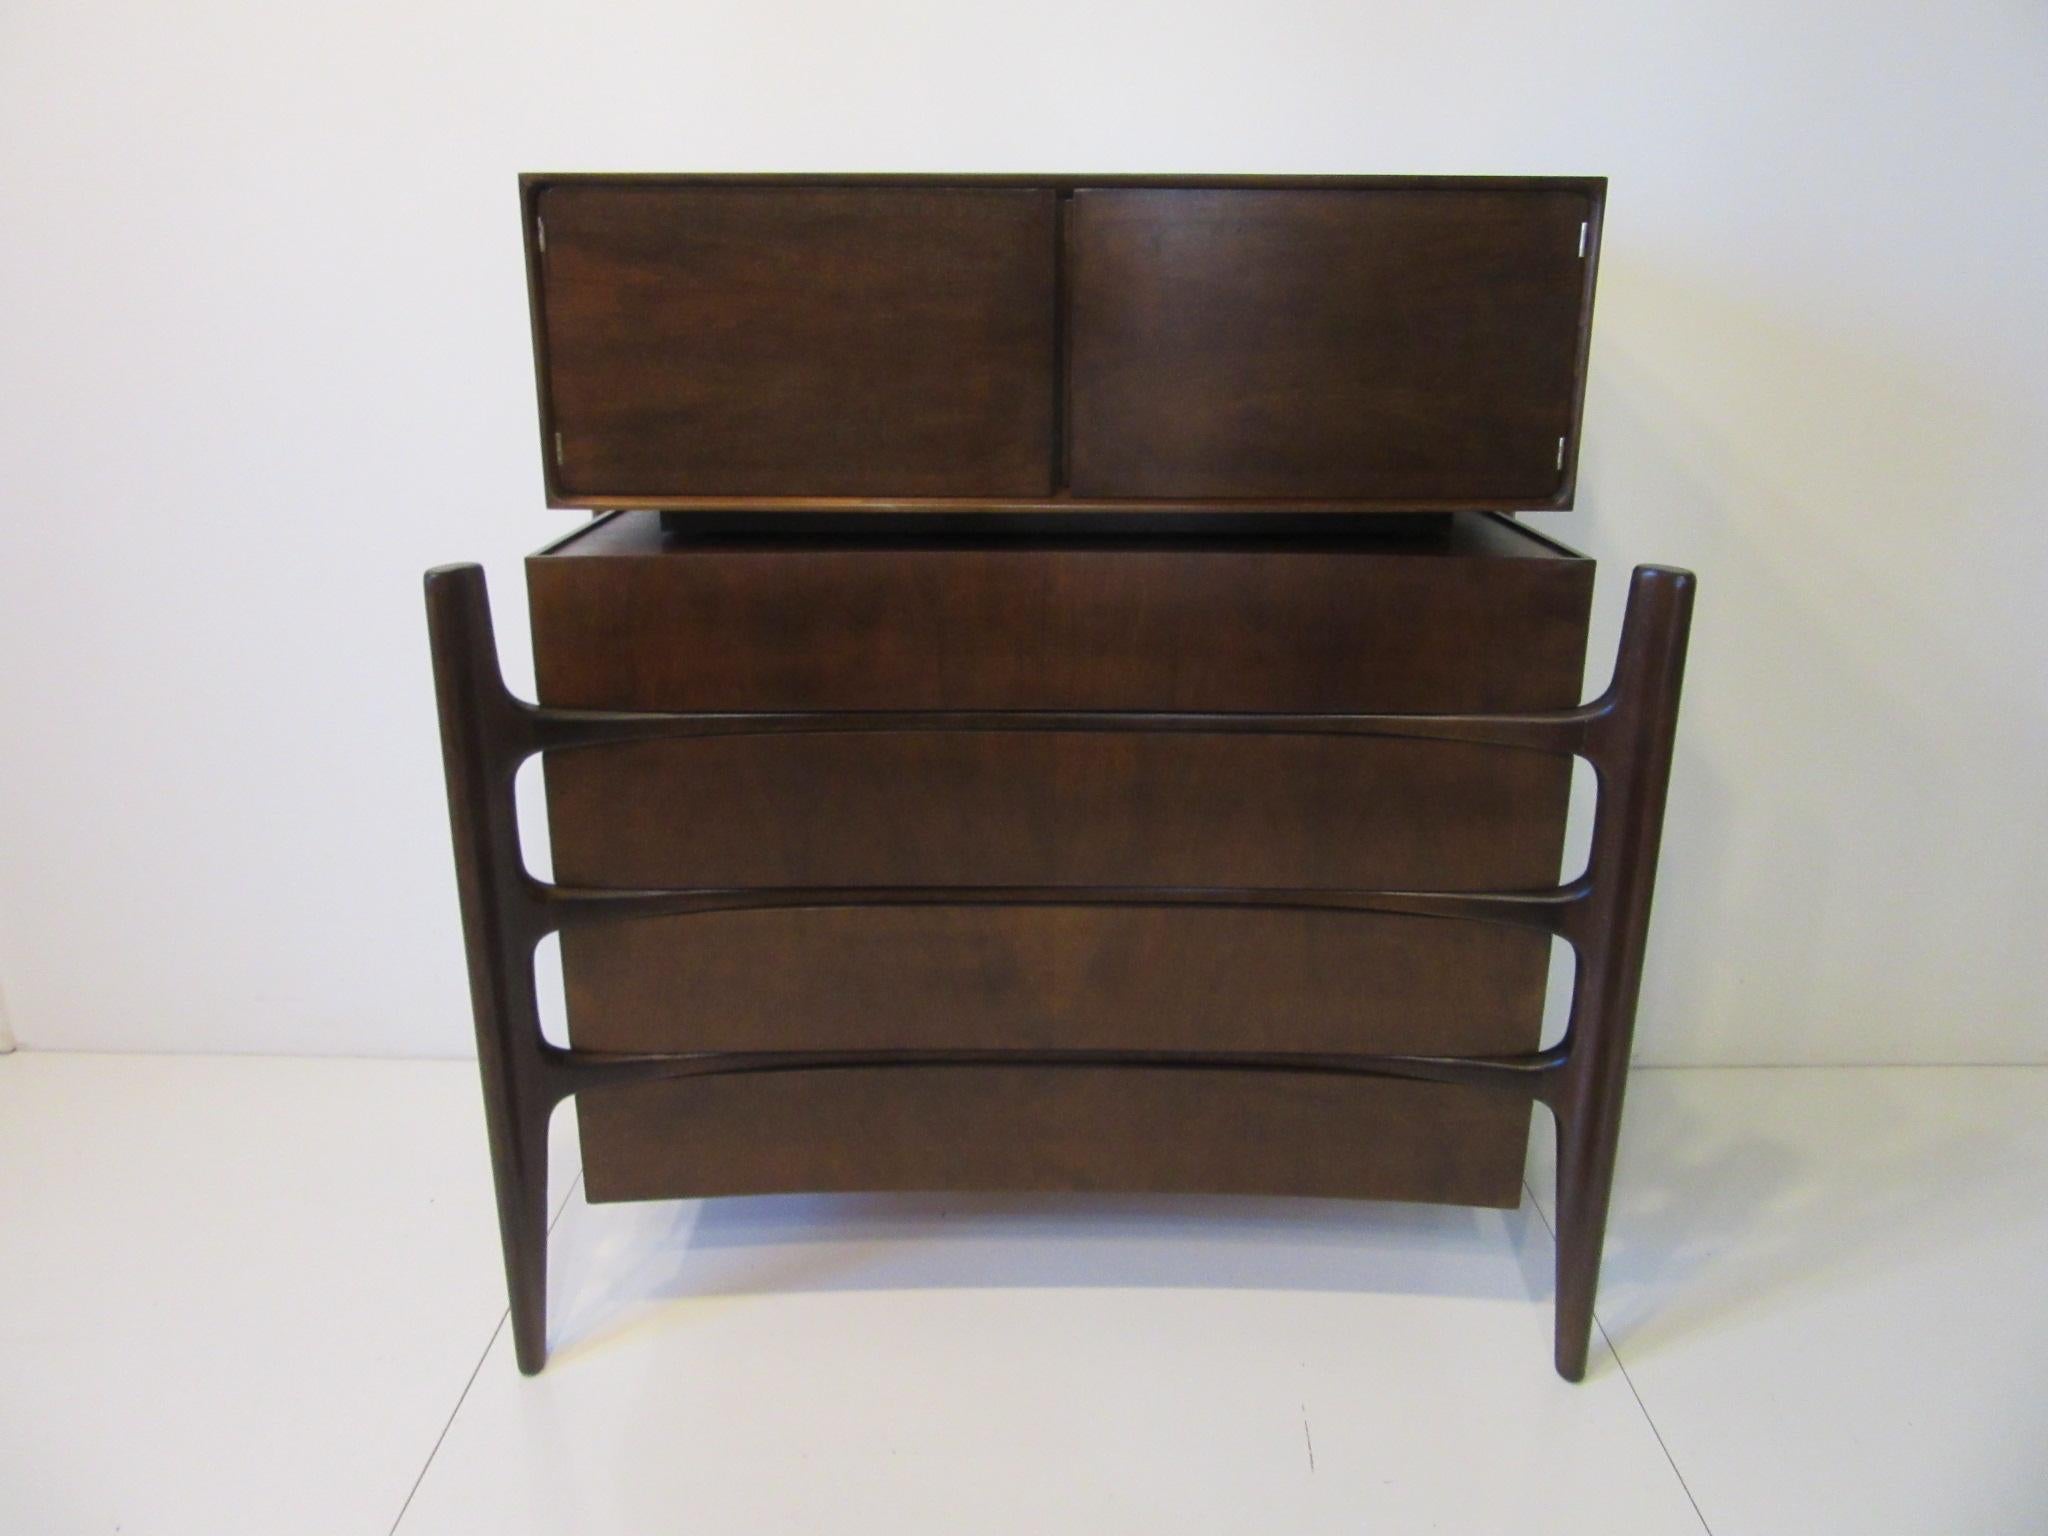 A well crafted 2-piece sculptural dresser / chest in a medium dark walnut finish with four drawer lower chest and upper two-door storage area having three sections. The interior is done in a clear birch wood to the inside drawers and storage